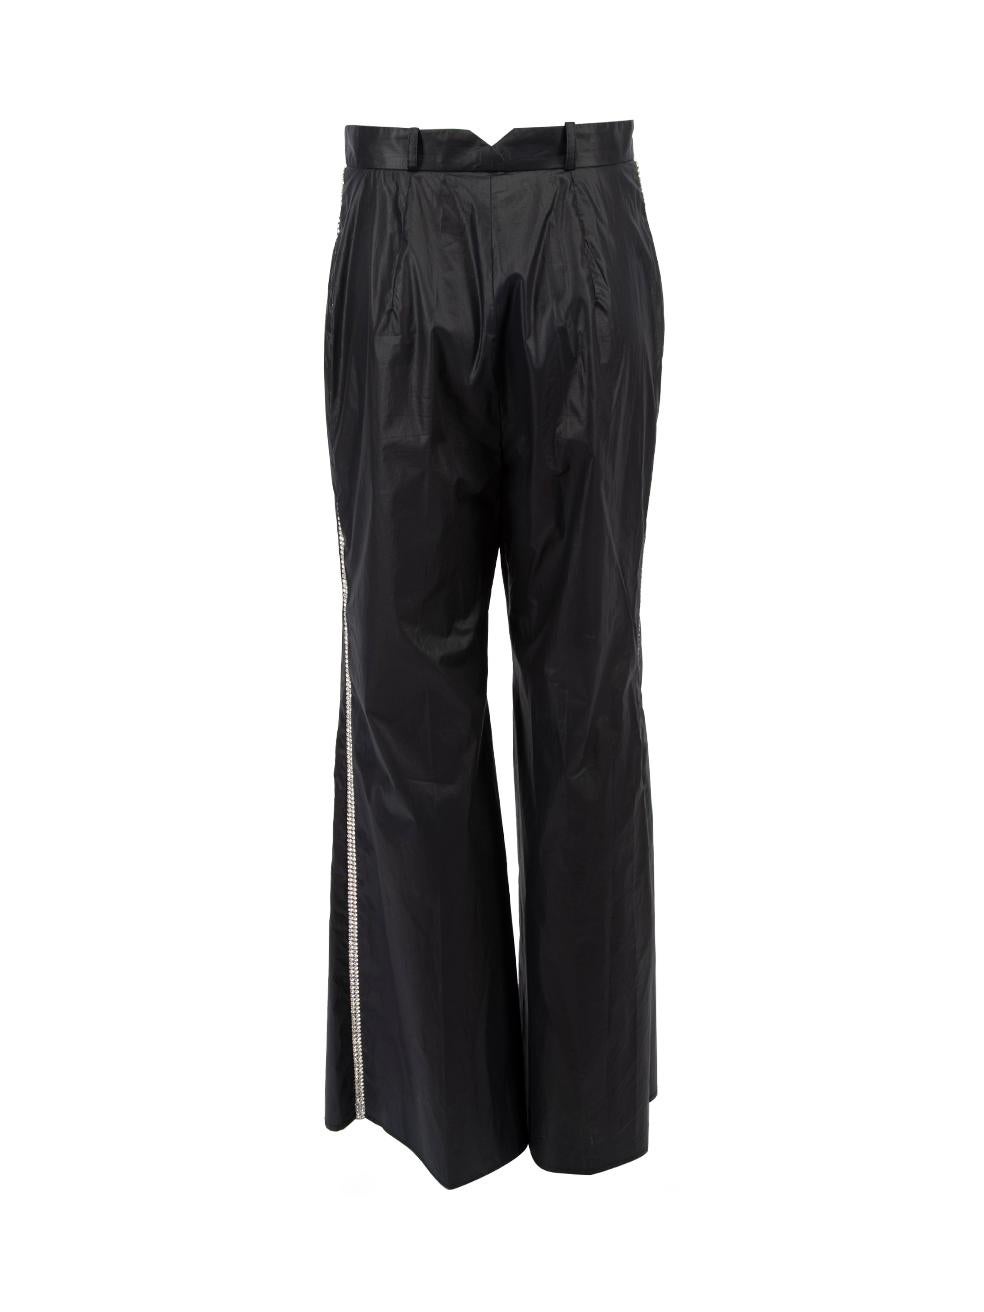 Pre-Loved Christopher Kane Women's Black Trousers with Diamanté Detail For Sale 1